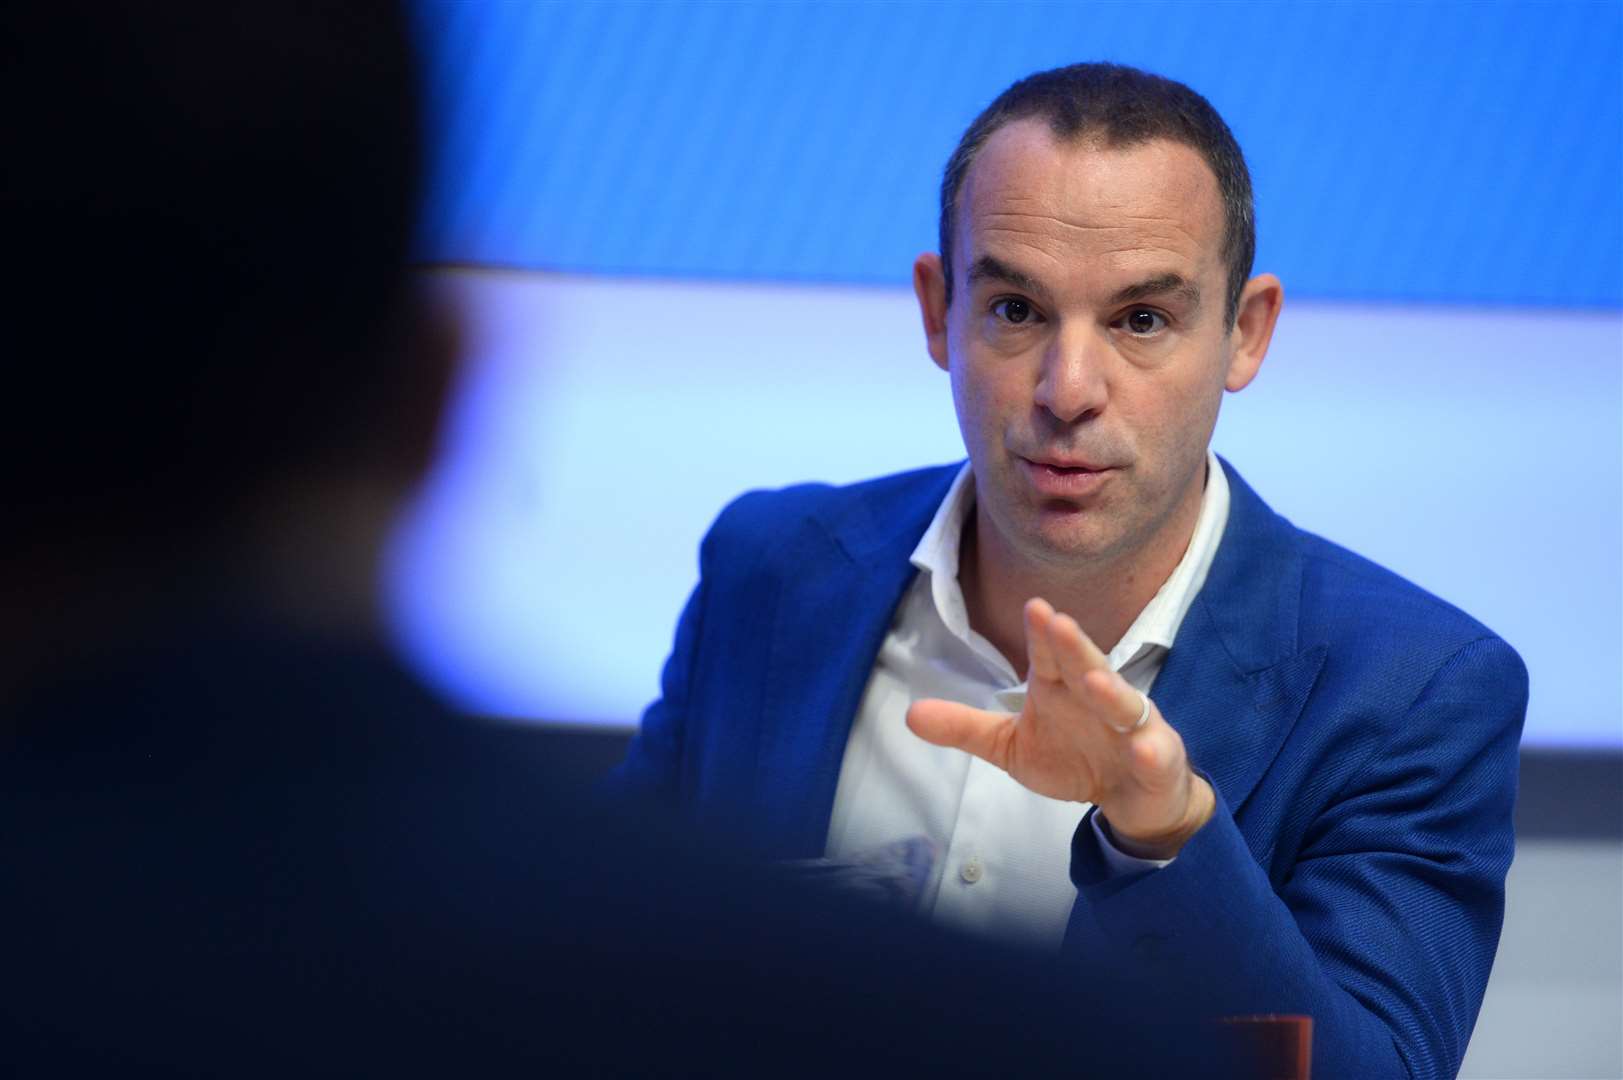 MoneySavingExpert’s Martin Lewis is said to have backed the idea (Kirsty O’Connor/PA)